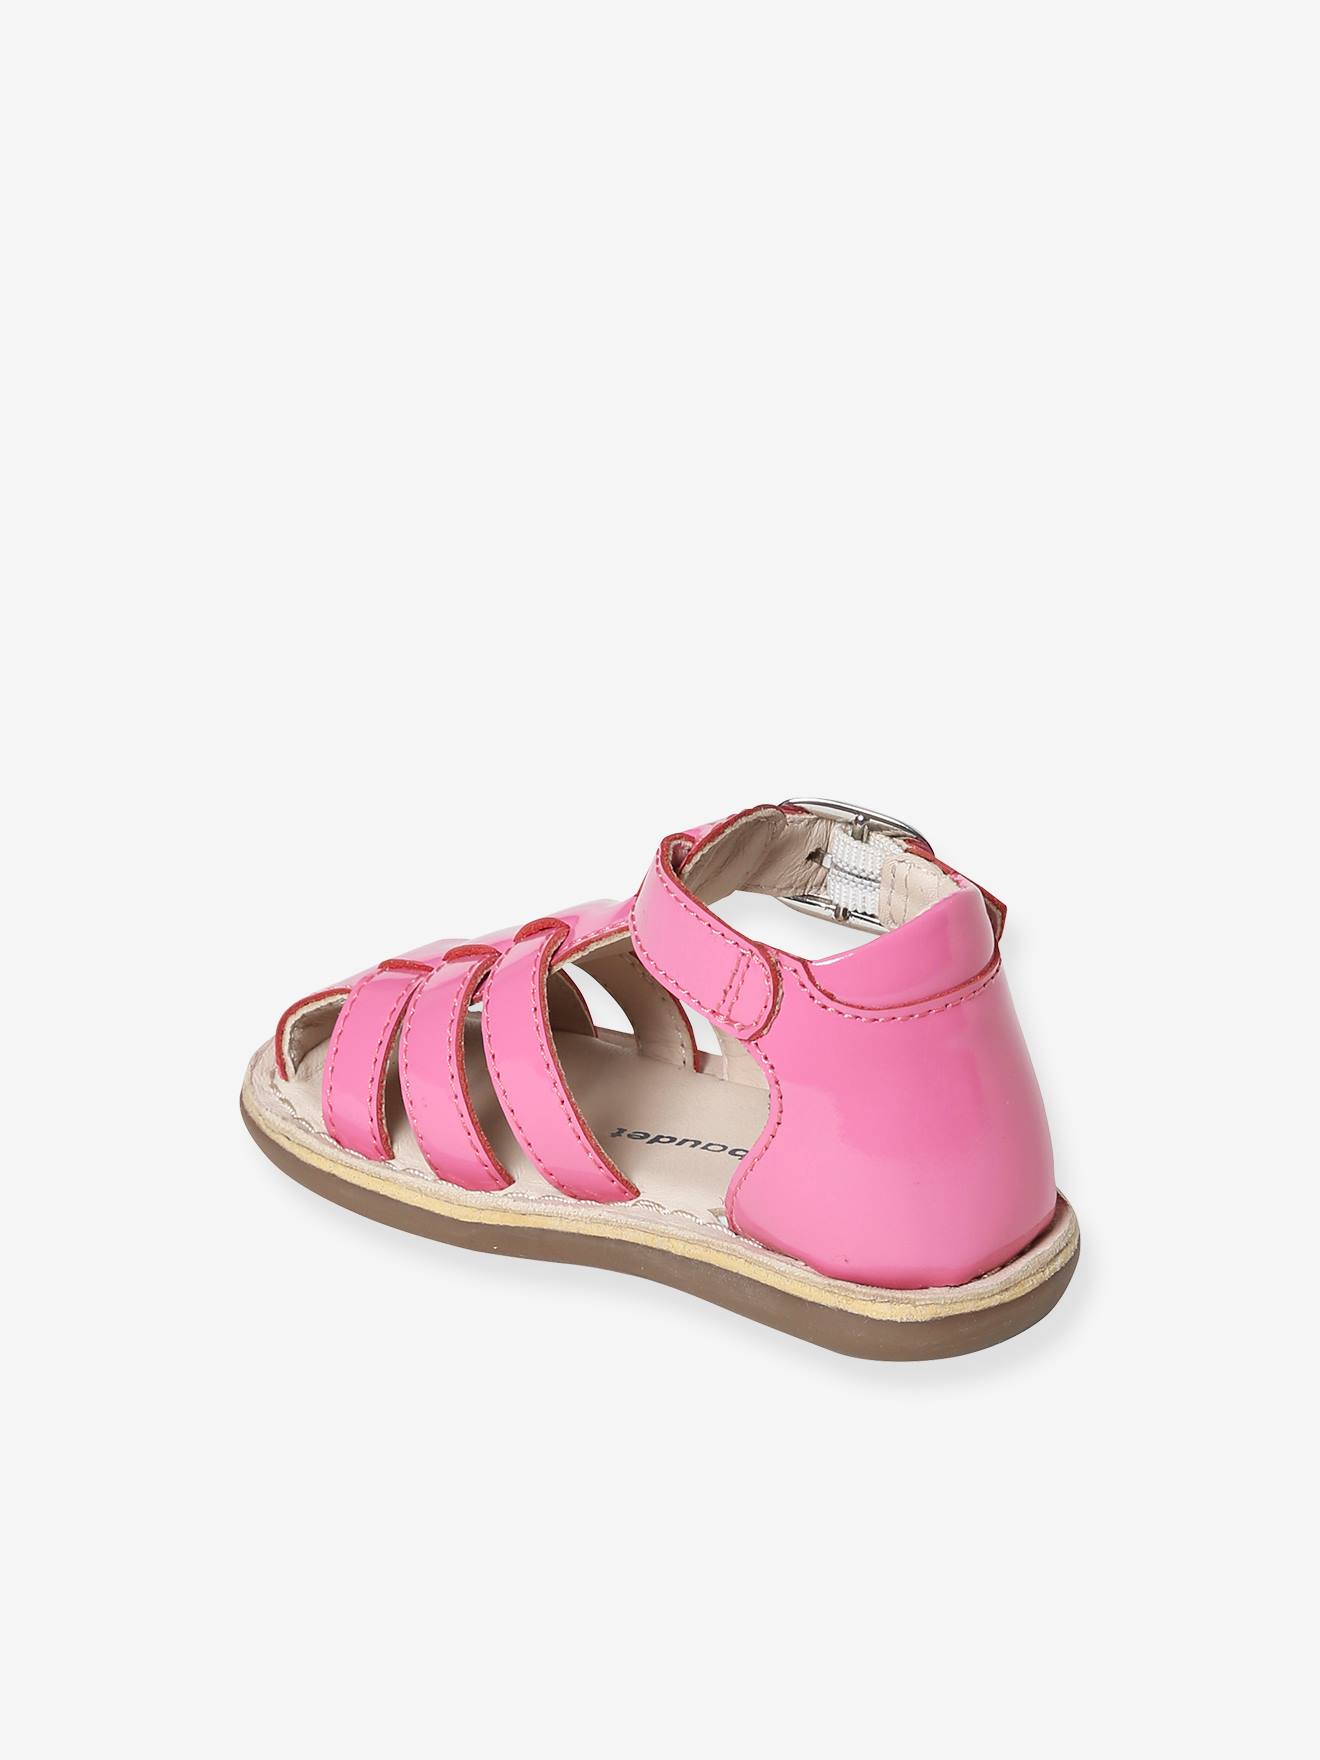 Leather Sandals Baby Girls, Closed Toe -